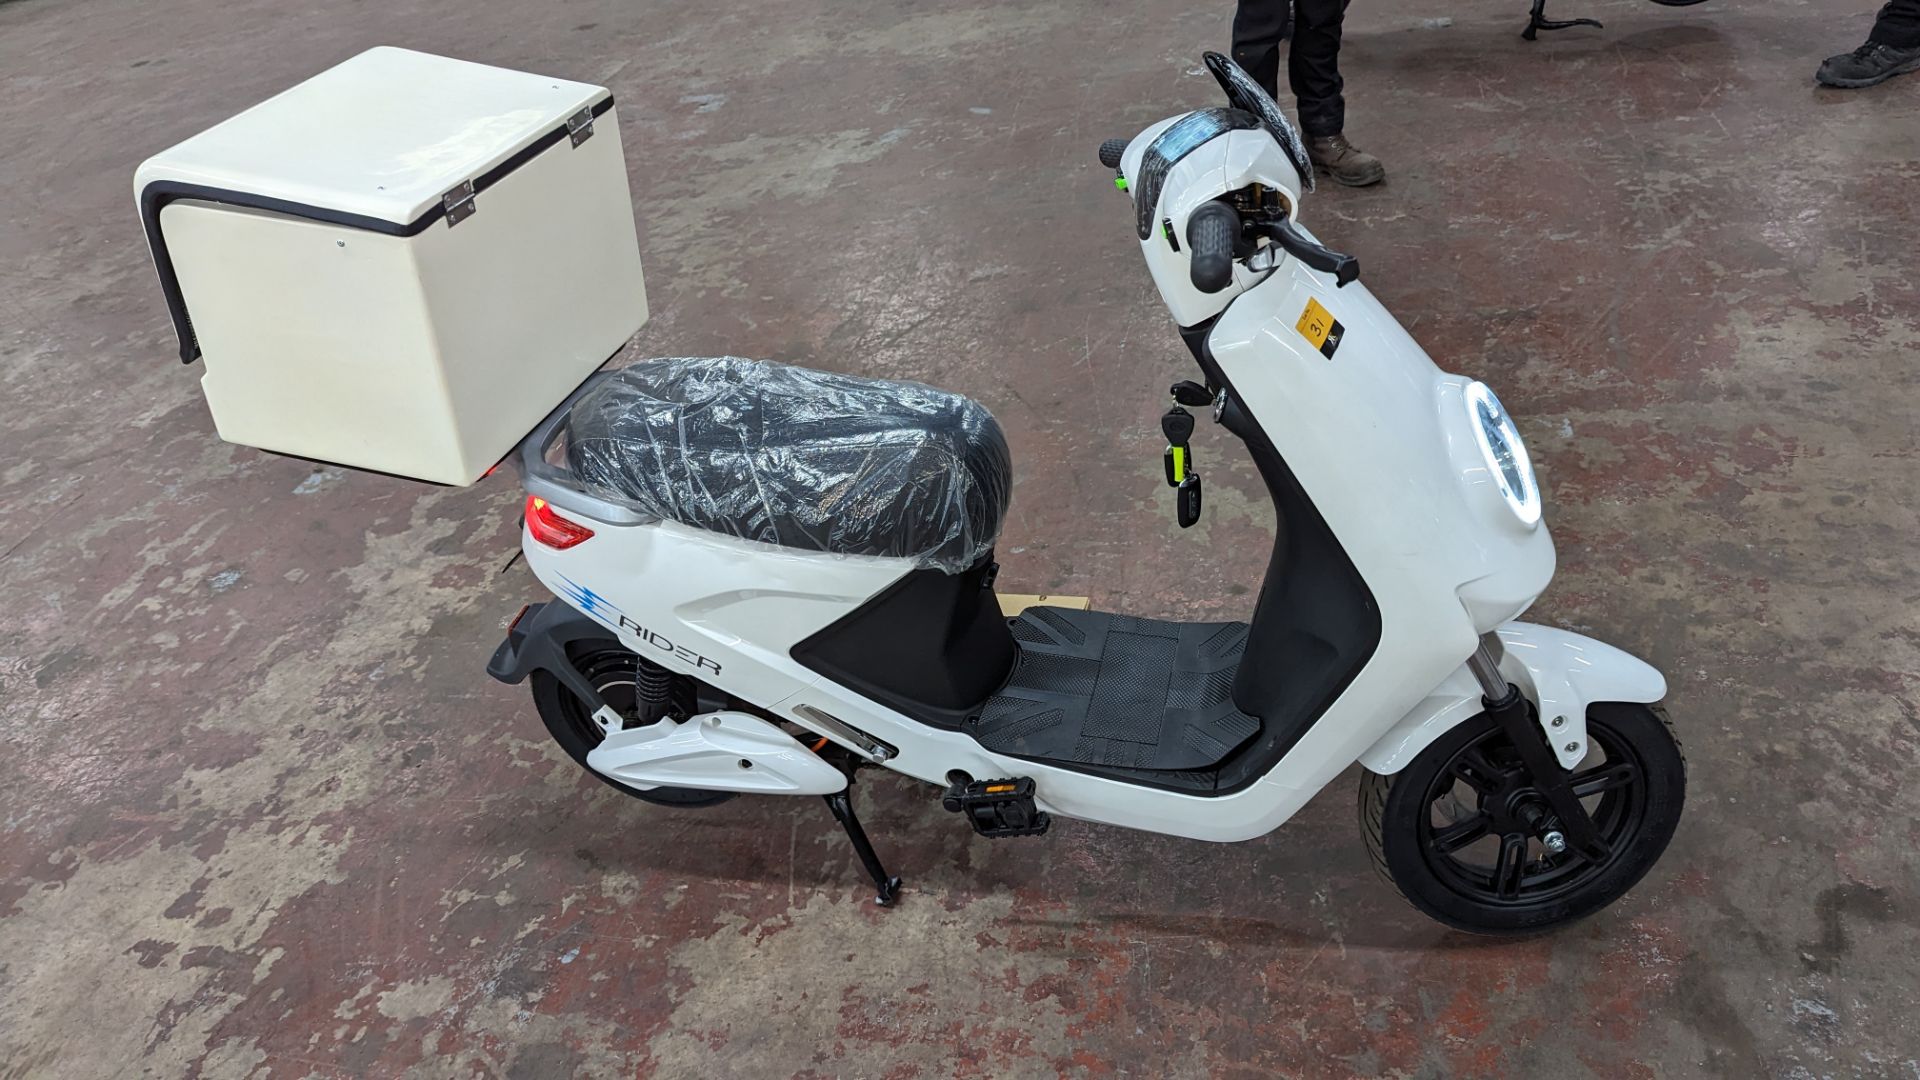 Model 18 Electric Bike: Zero (0) recorded miles, white body with black detailing, insulated box moun - Image 6 of 13